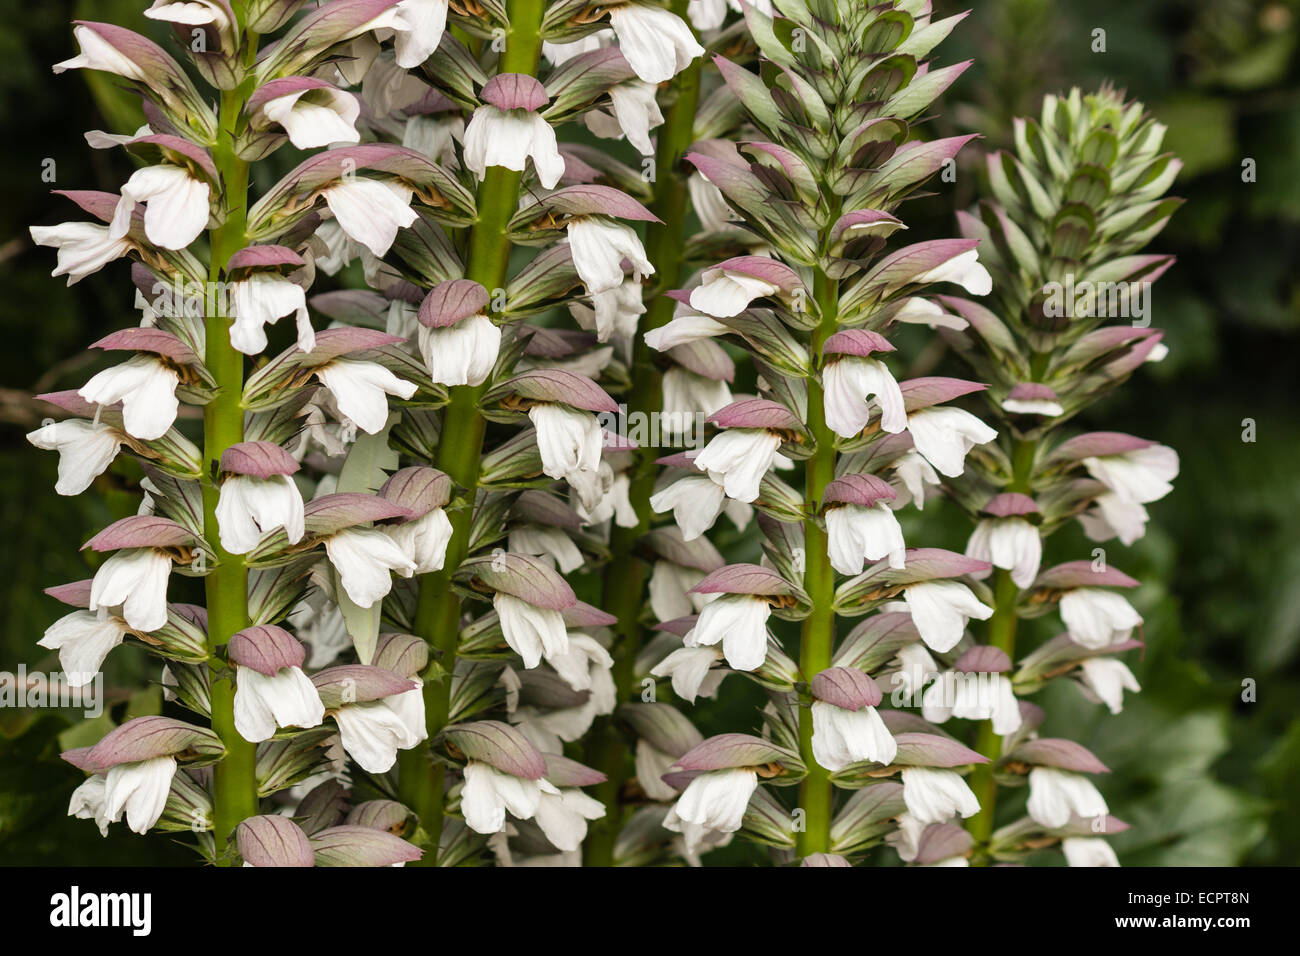 detail of acanthus plant flowers Stock Photo